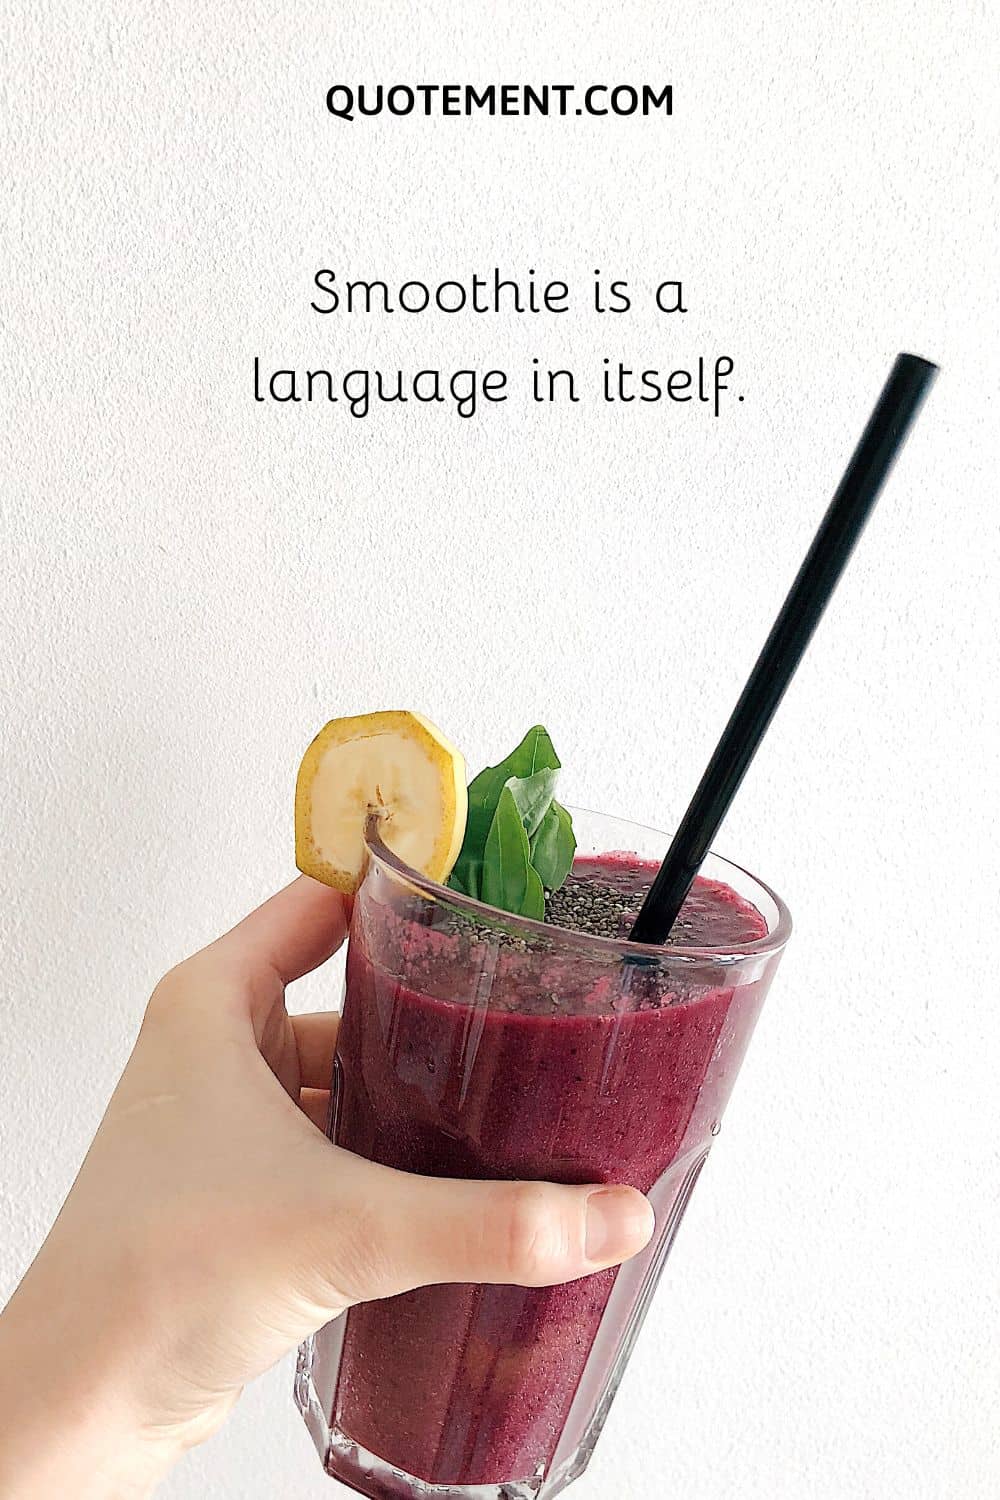 Smoothie is a language in itself.